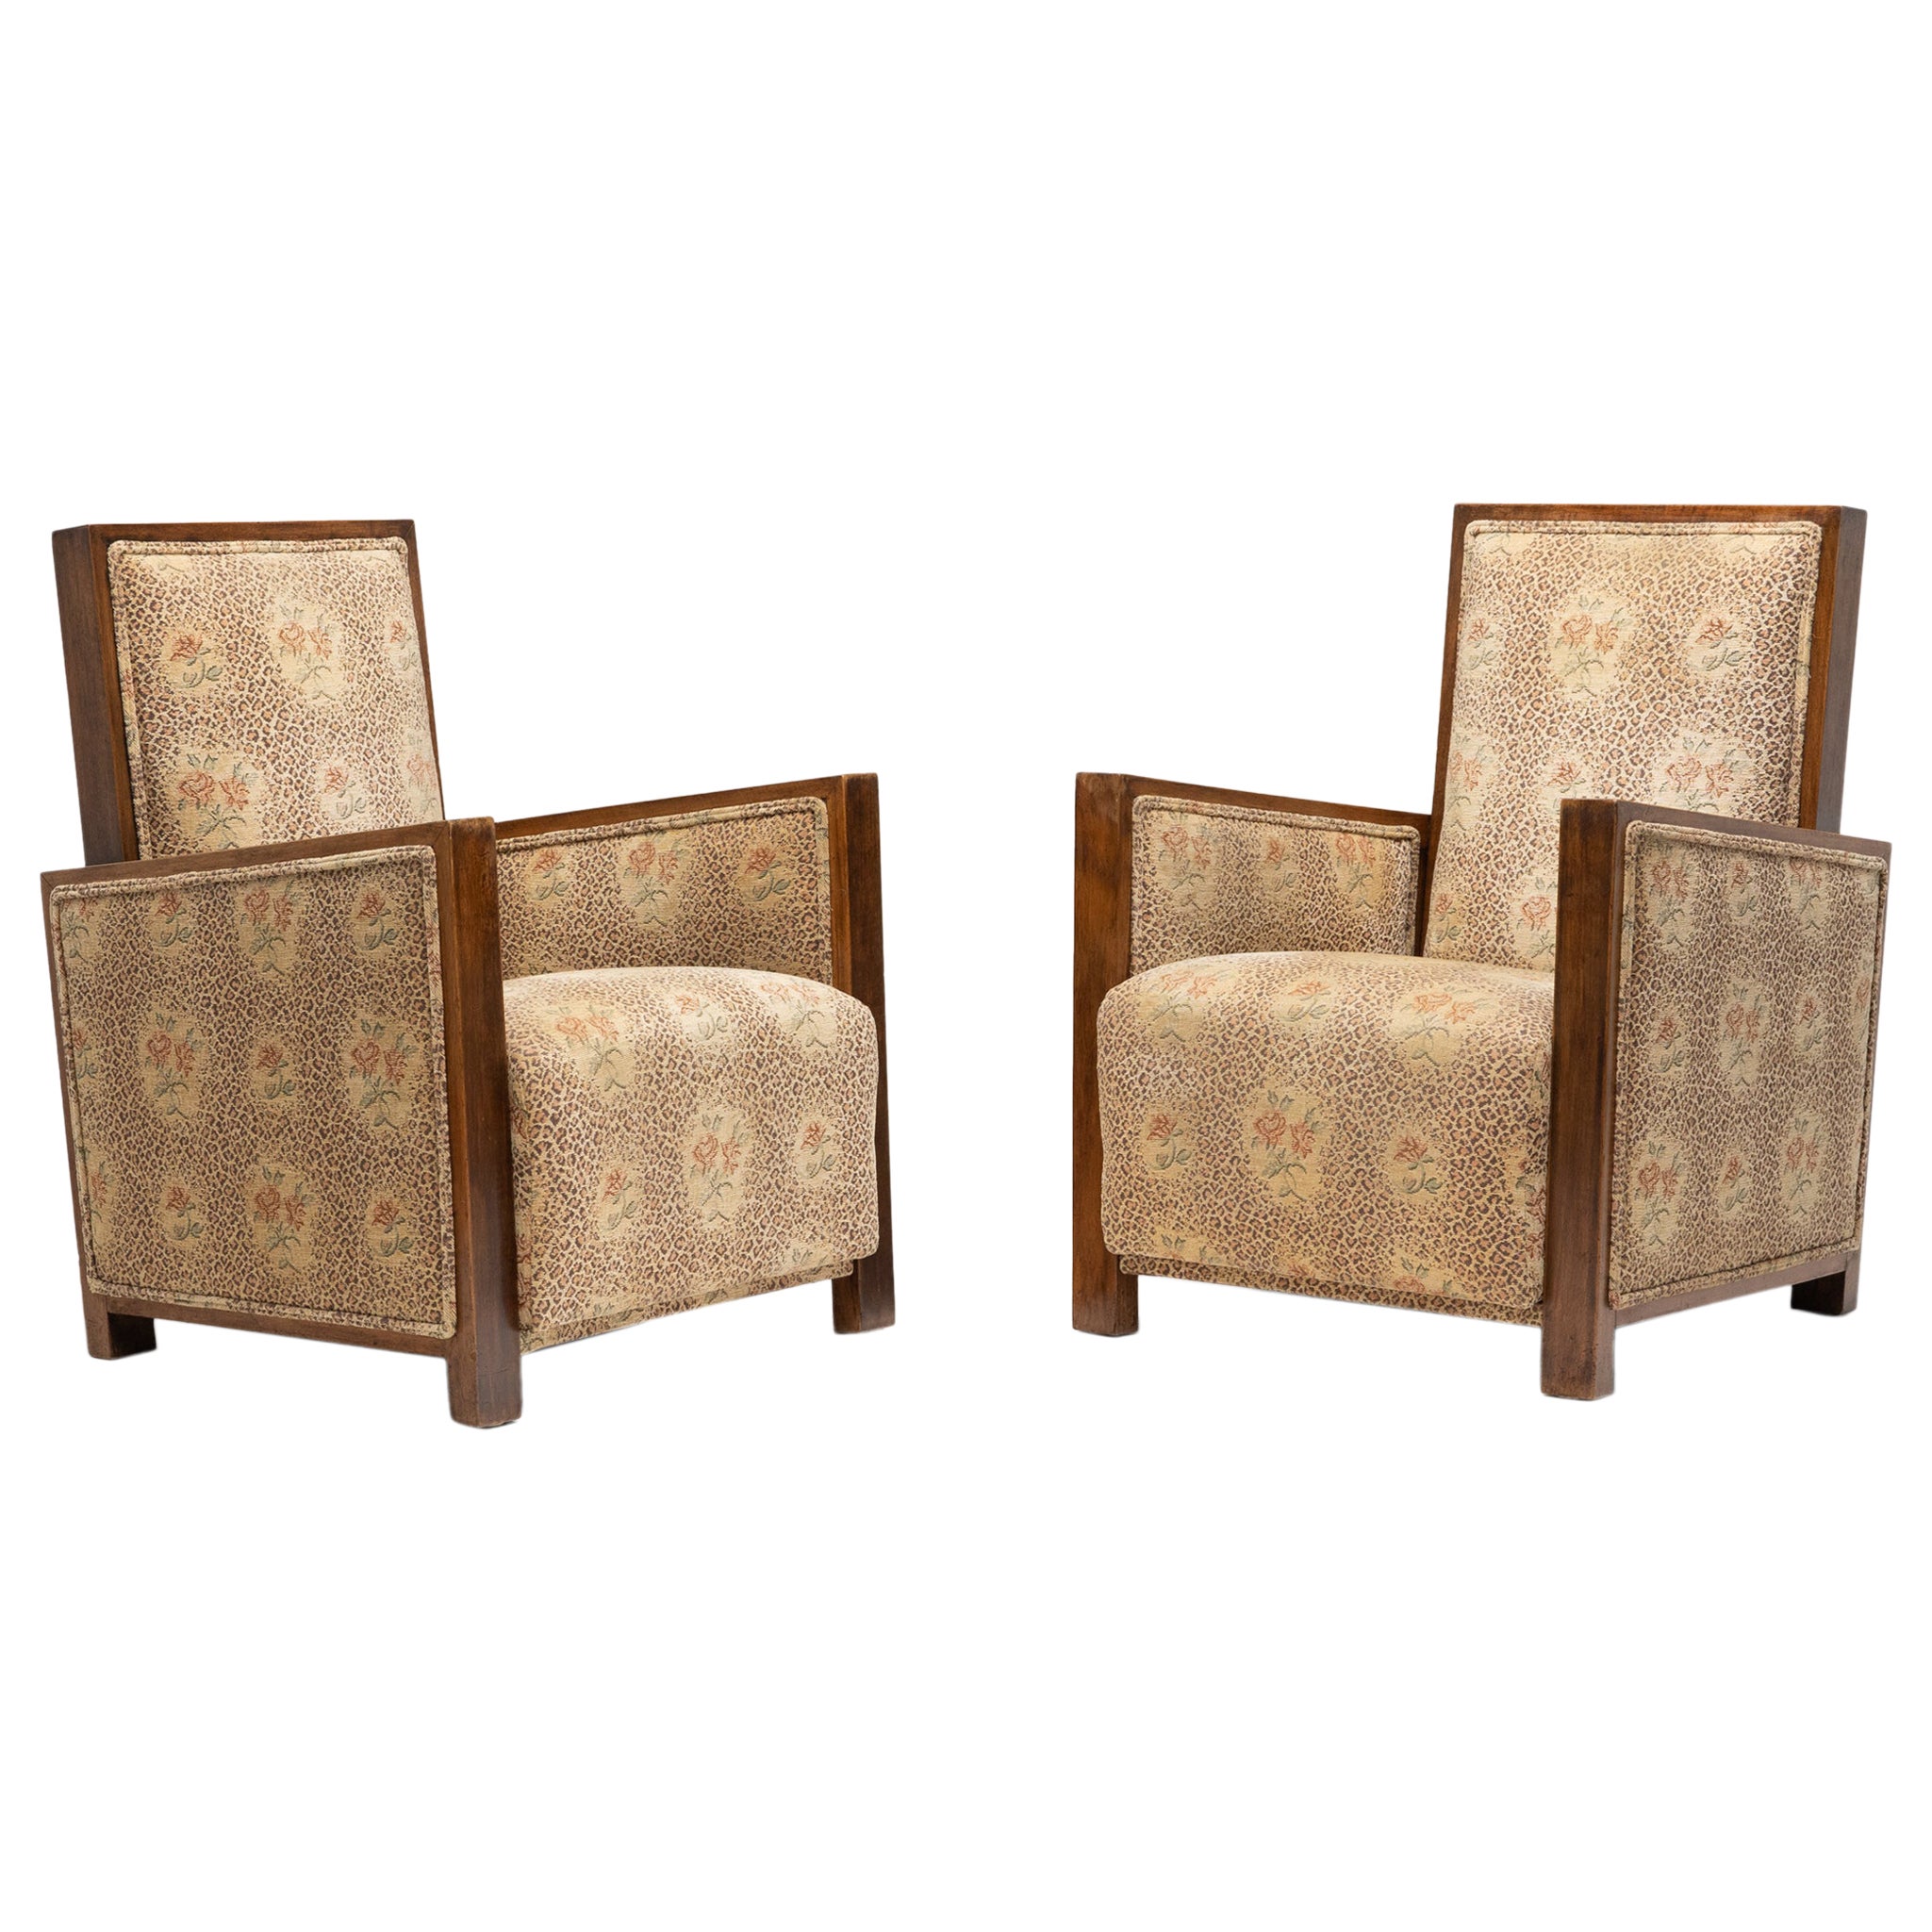 Pair of French Art Deco Armchairs, c. 1930